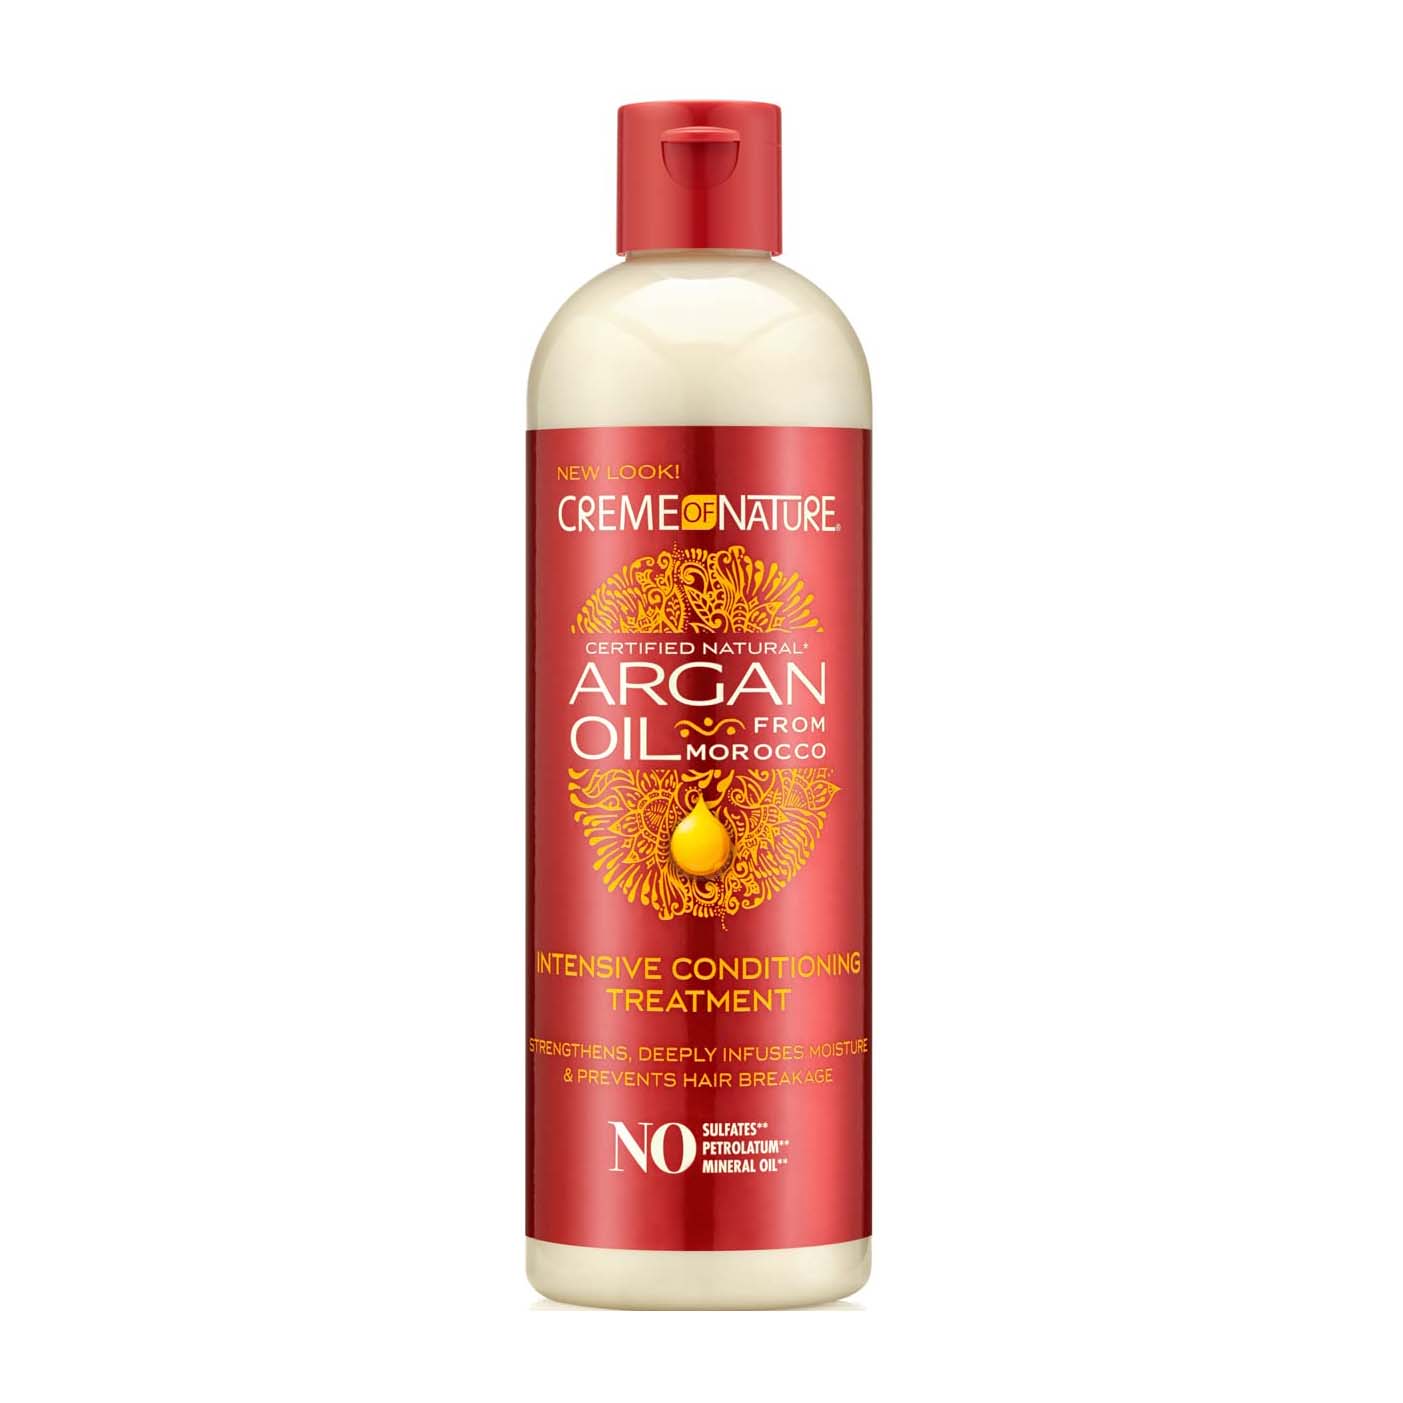 Creme Of Nature Argan Oil From Morocco Intensive Conditioning Treatment – 354ml - Bloom Pharmacy